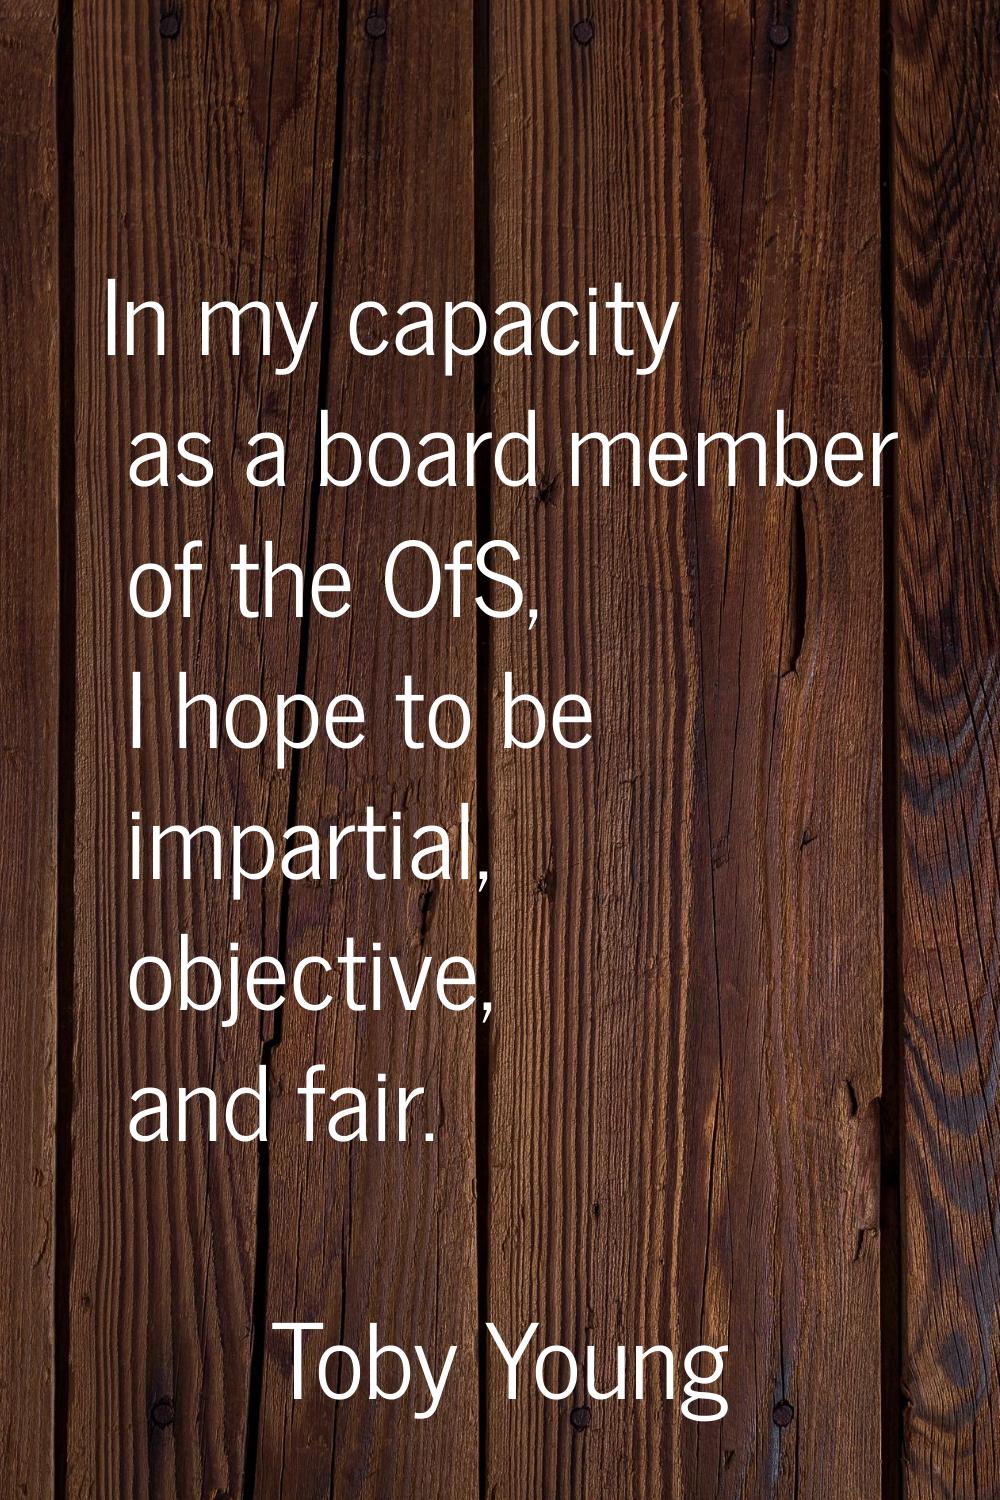 In my capacity as a board member of the OfS, I hope to be impartial, objective, and fair.